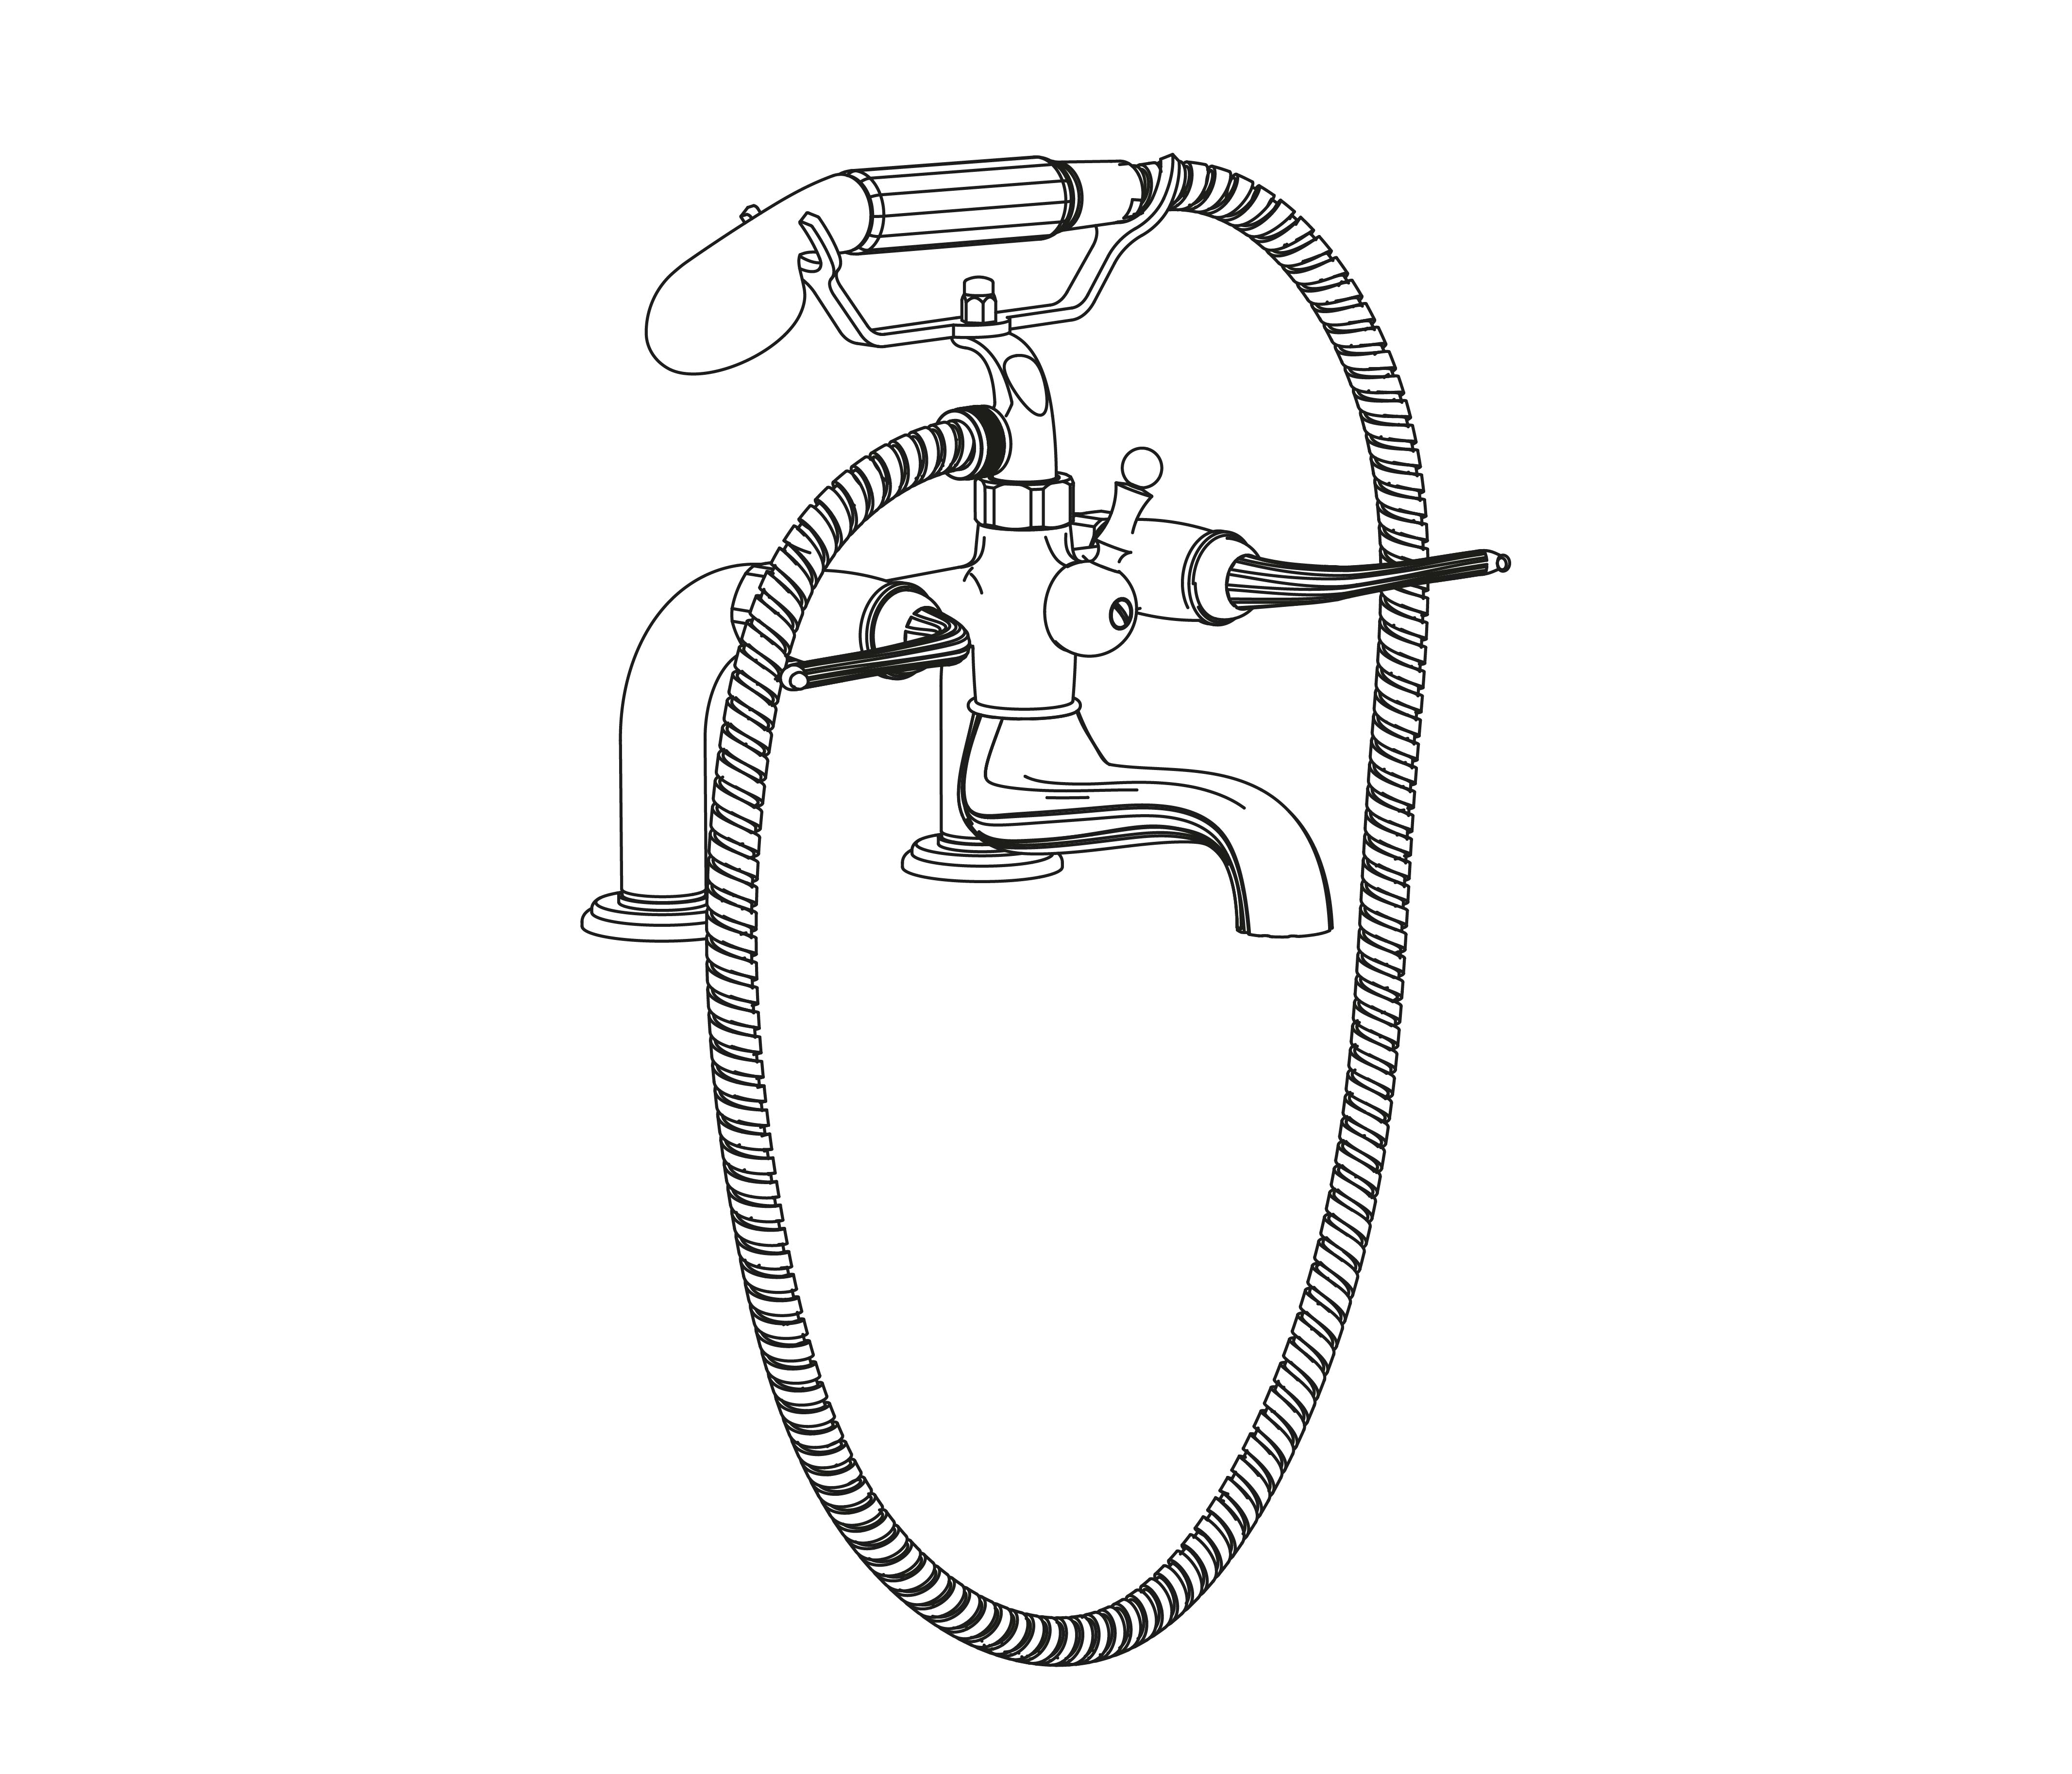 C67-3306 Rim mounted bath and shower mixer